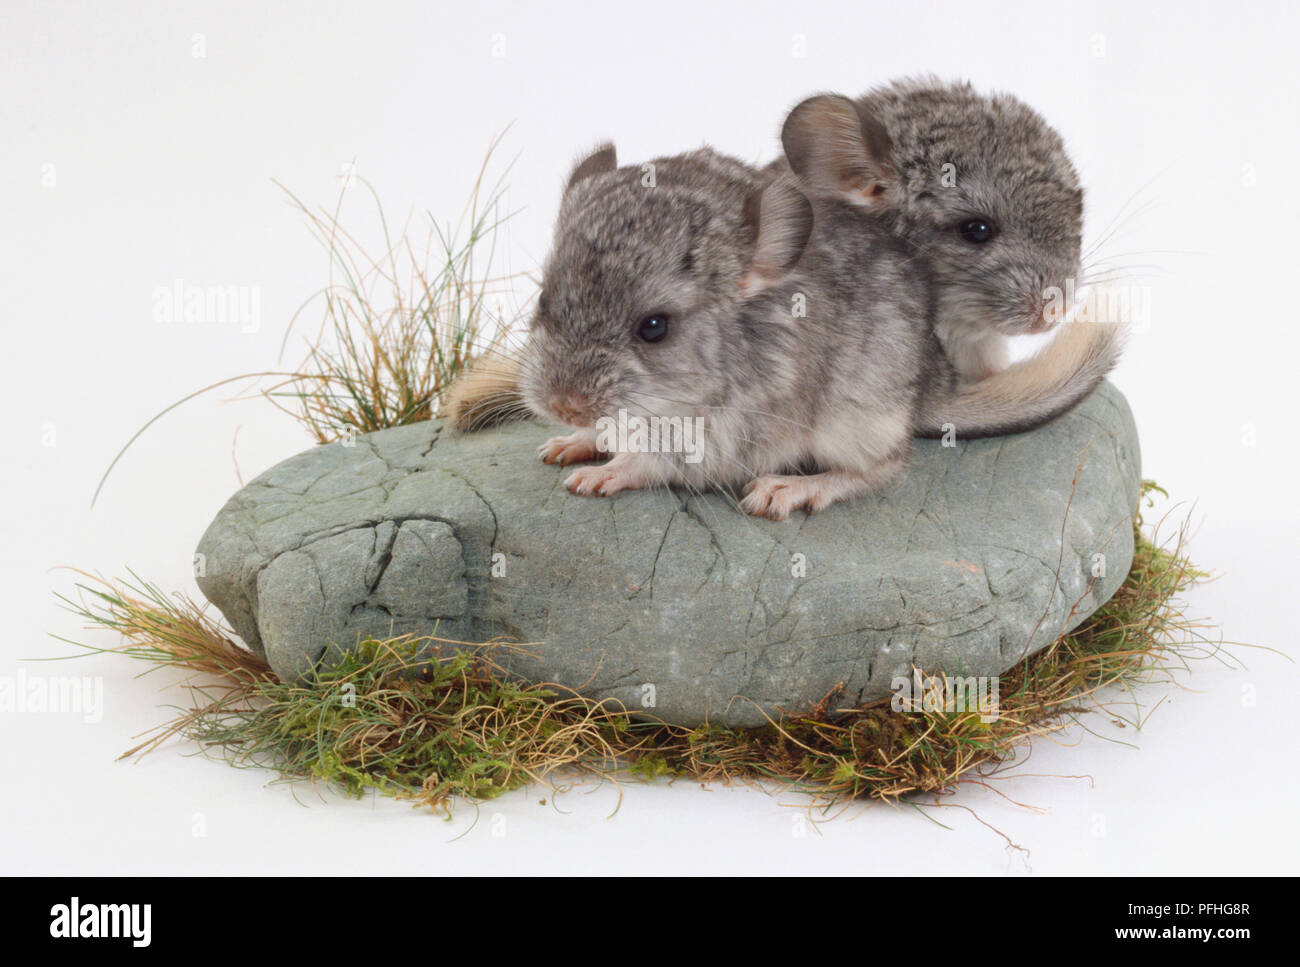 Two Chinchillas standing on a rock, one hiding slightly behind the other. Stock Photo